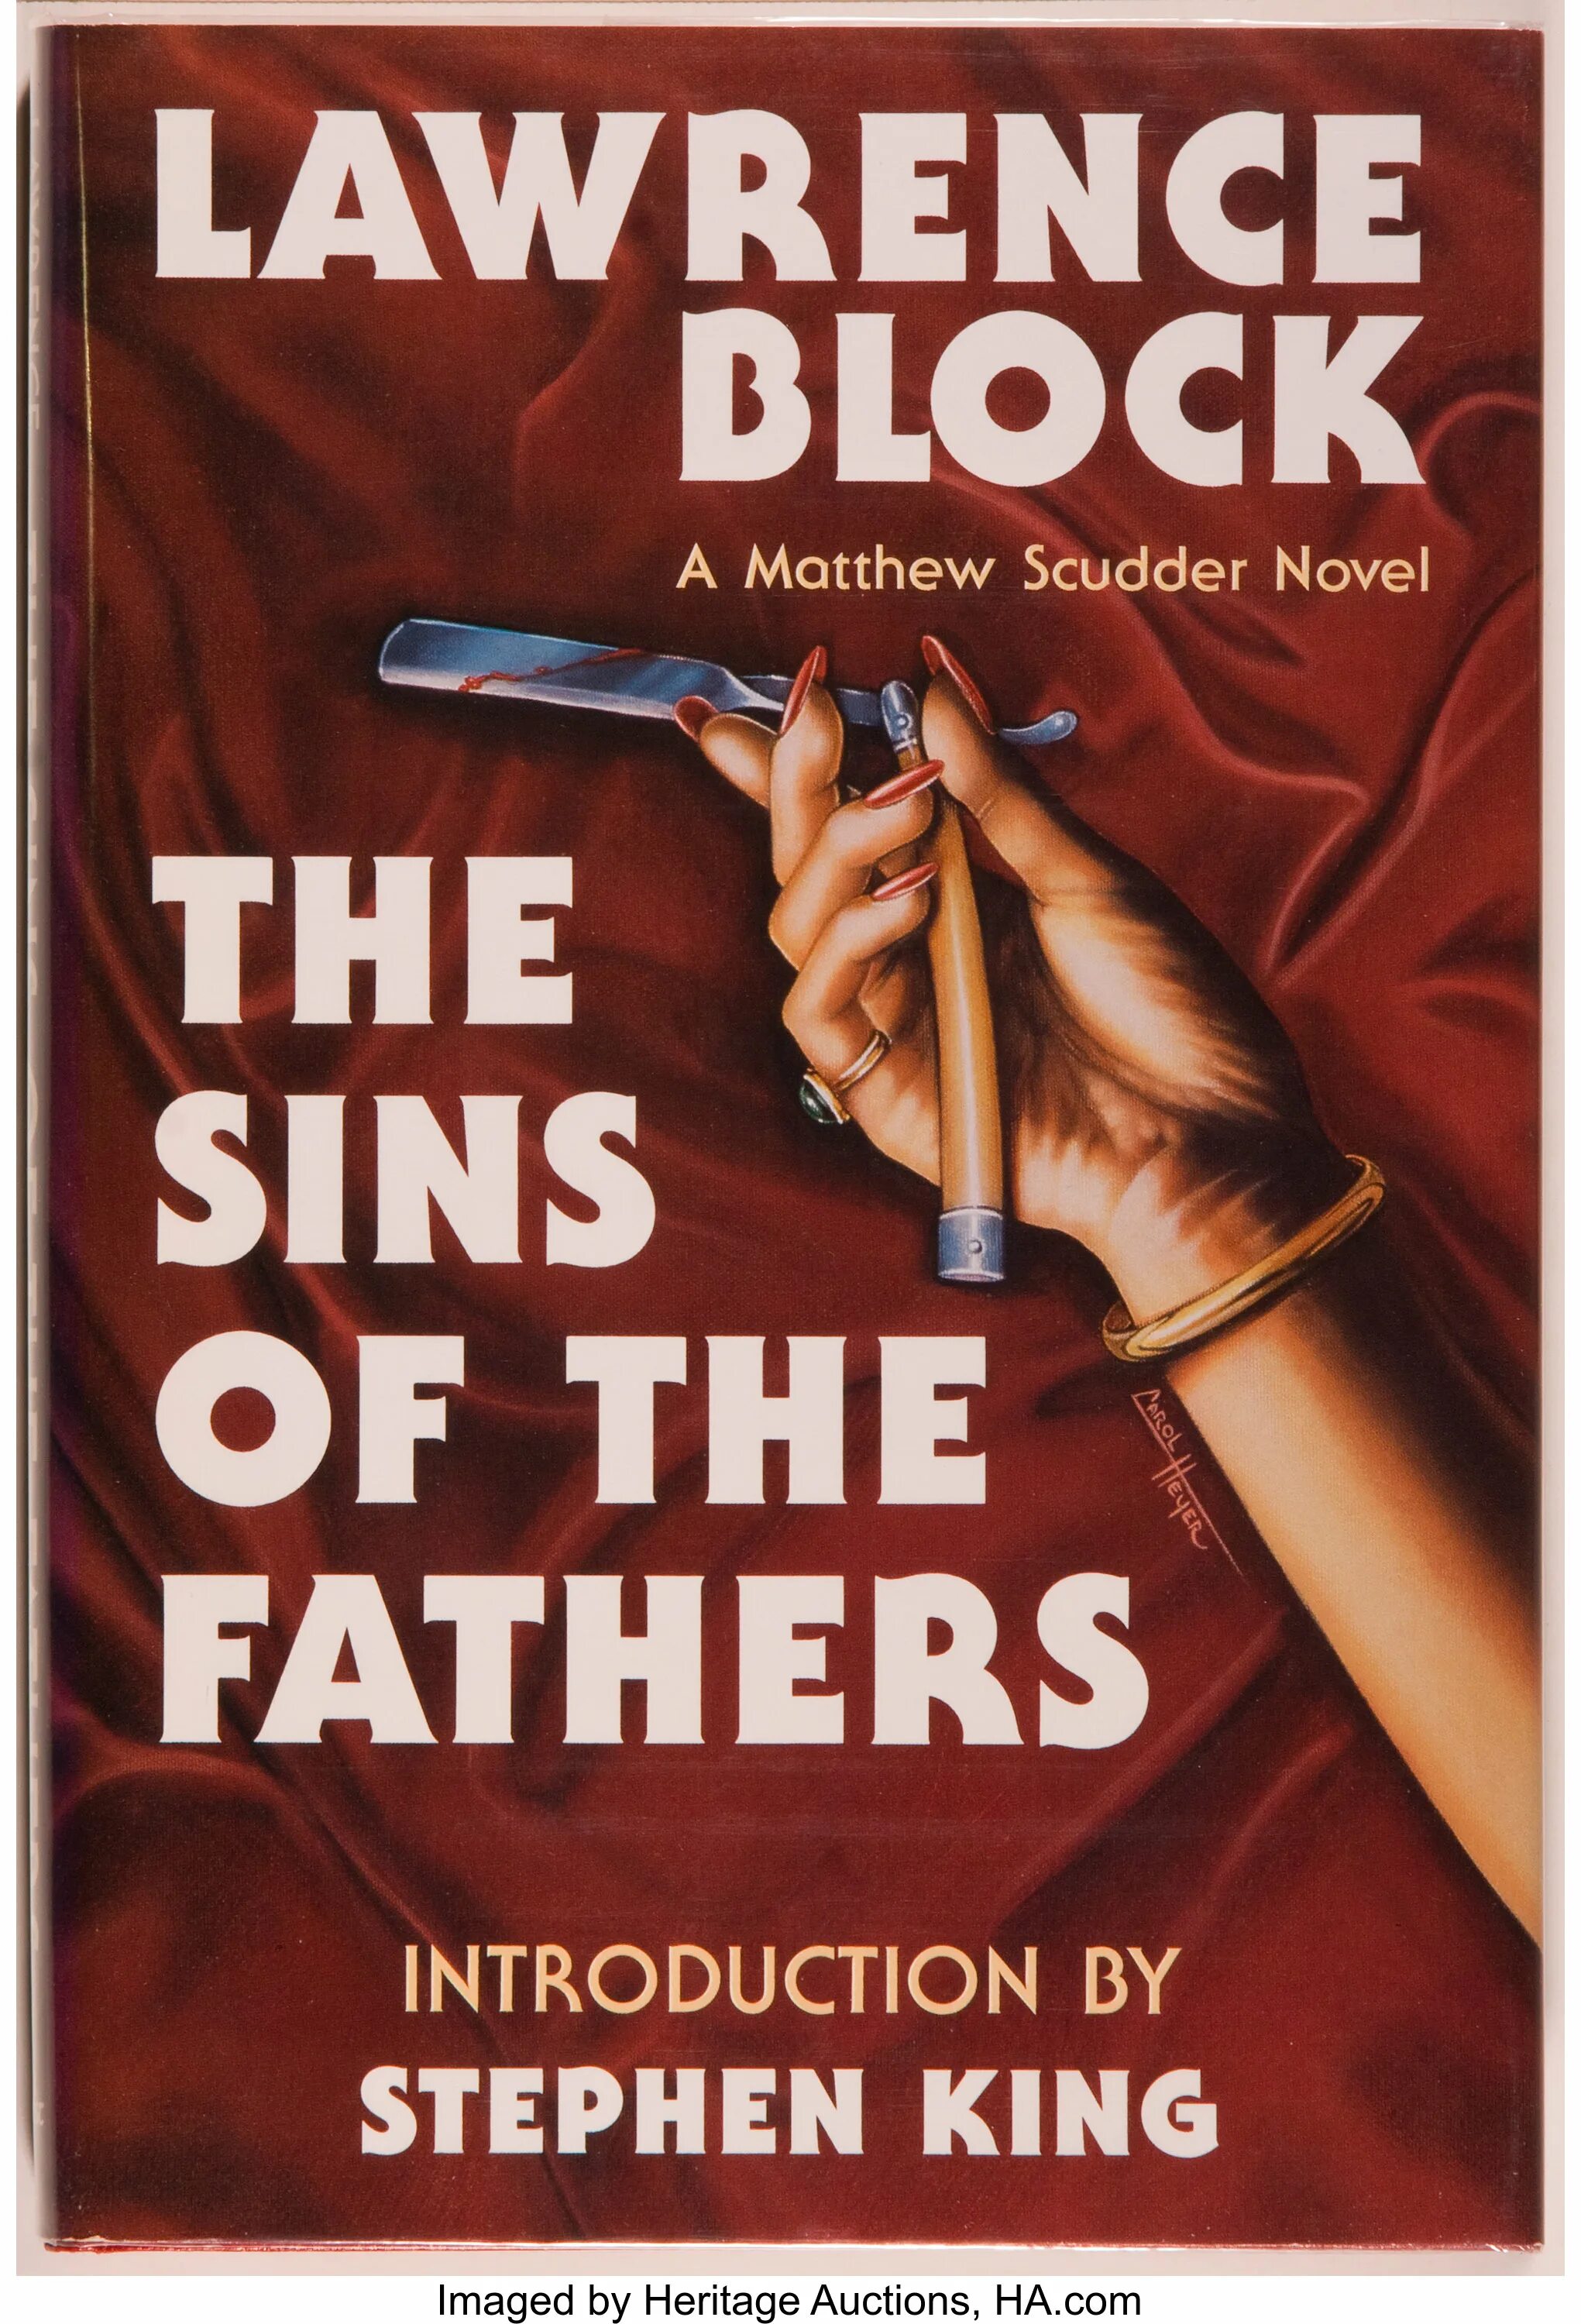 Lawrence Block the sins of the fathers (1976). Зарубежные детективы и триллеры аудиокниги. Грешник аудиокнига. Детективы басковой слушать аудиокниги